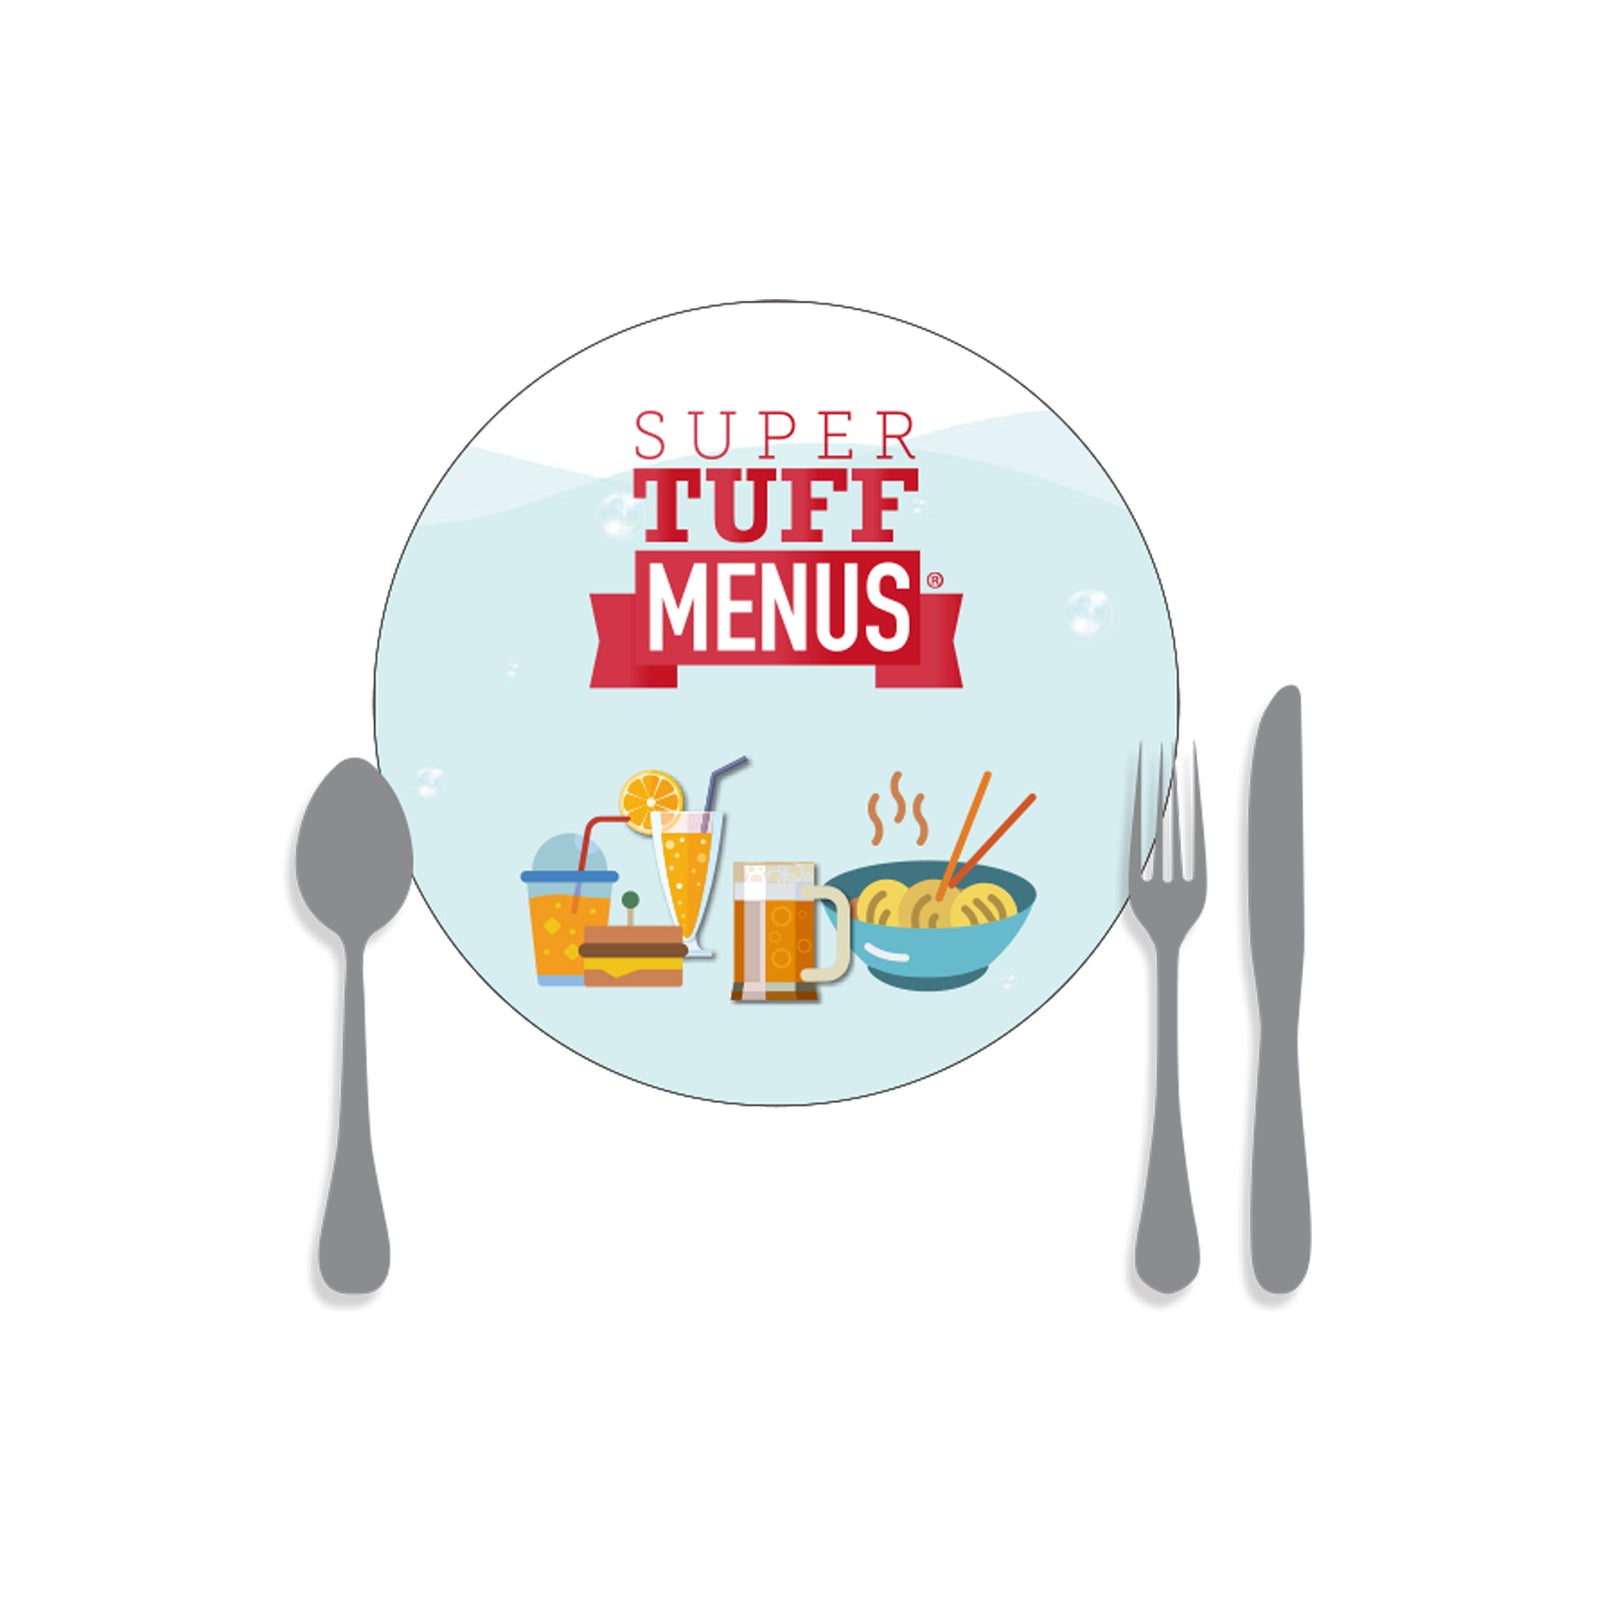 A drawing of our small round placemat SuperTuffMenus along side drawings of cutlery to give the size impression